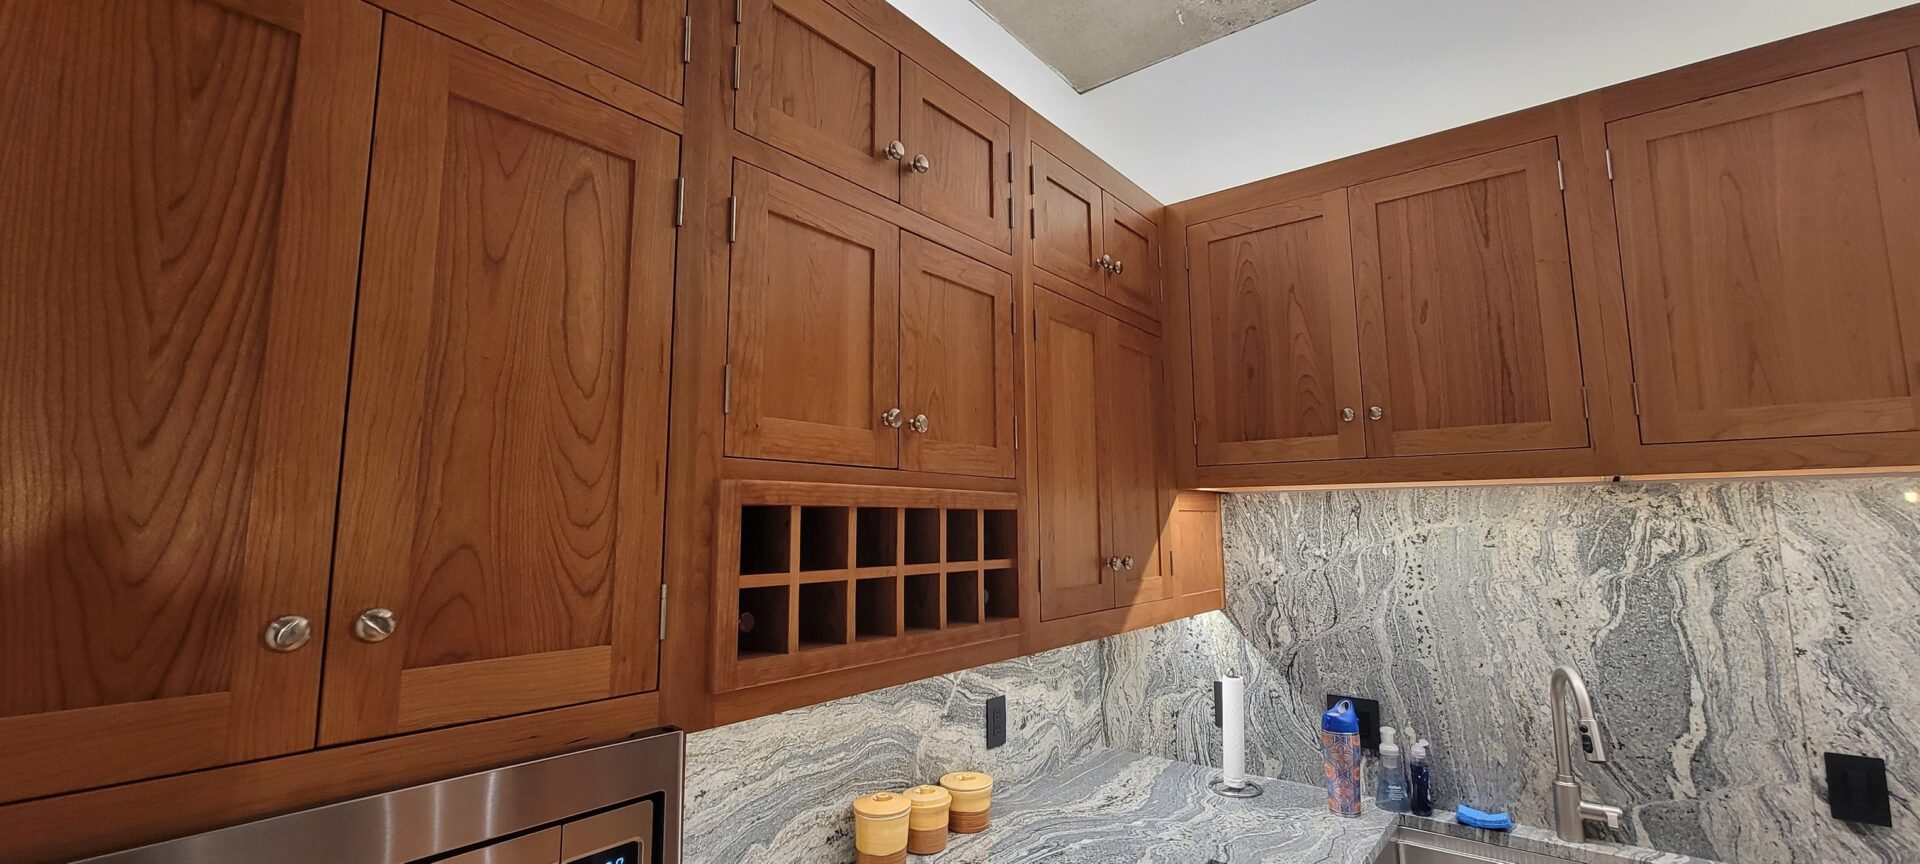 A kitchen with wooden cabinets and marble countertops.